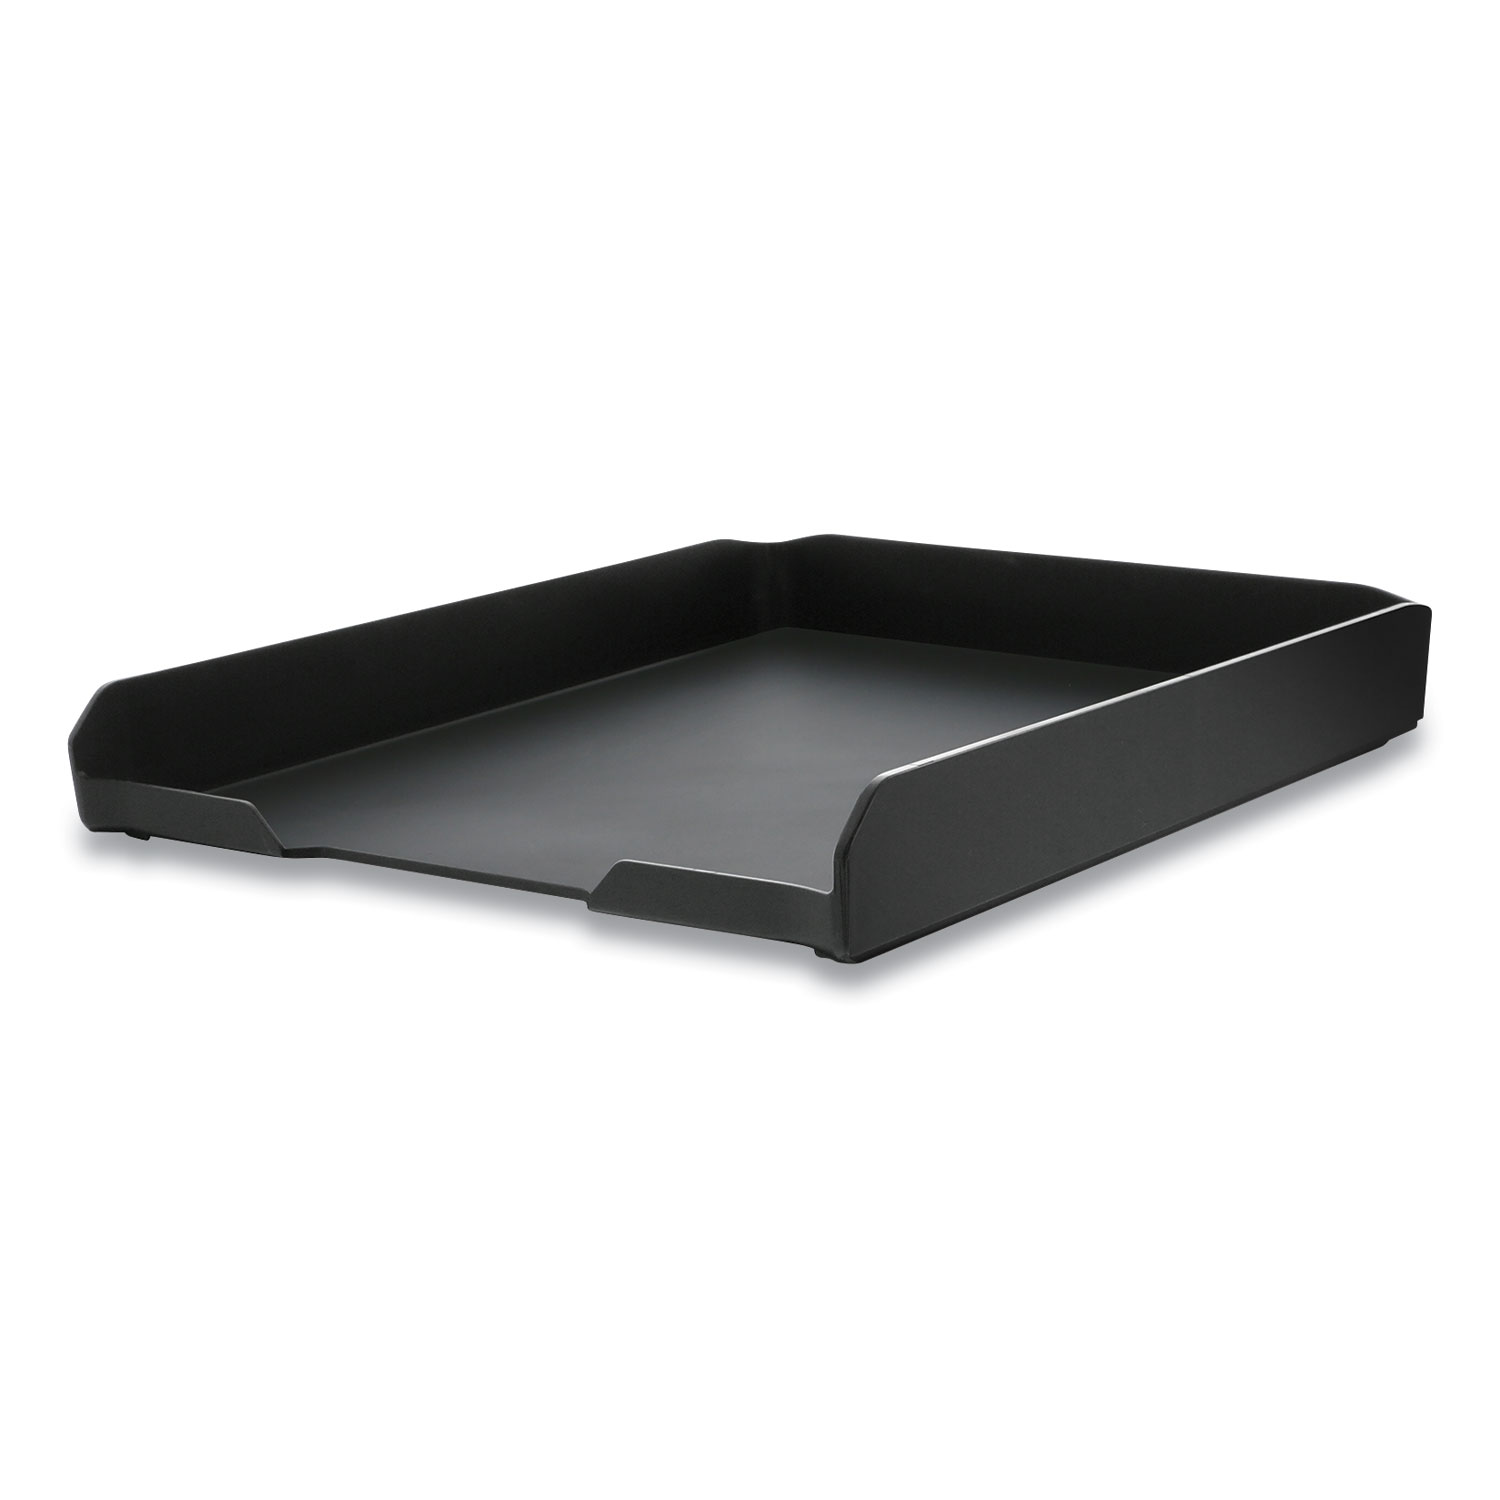  Bostitch KT-TRAY-BLK Konnect Stackable Letter Tray, 1 Section, Letter Size Files, 10.13 x 12.25 x 1.63, Black (BOS24357581) 